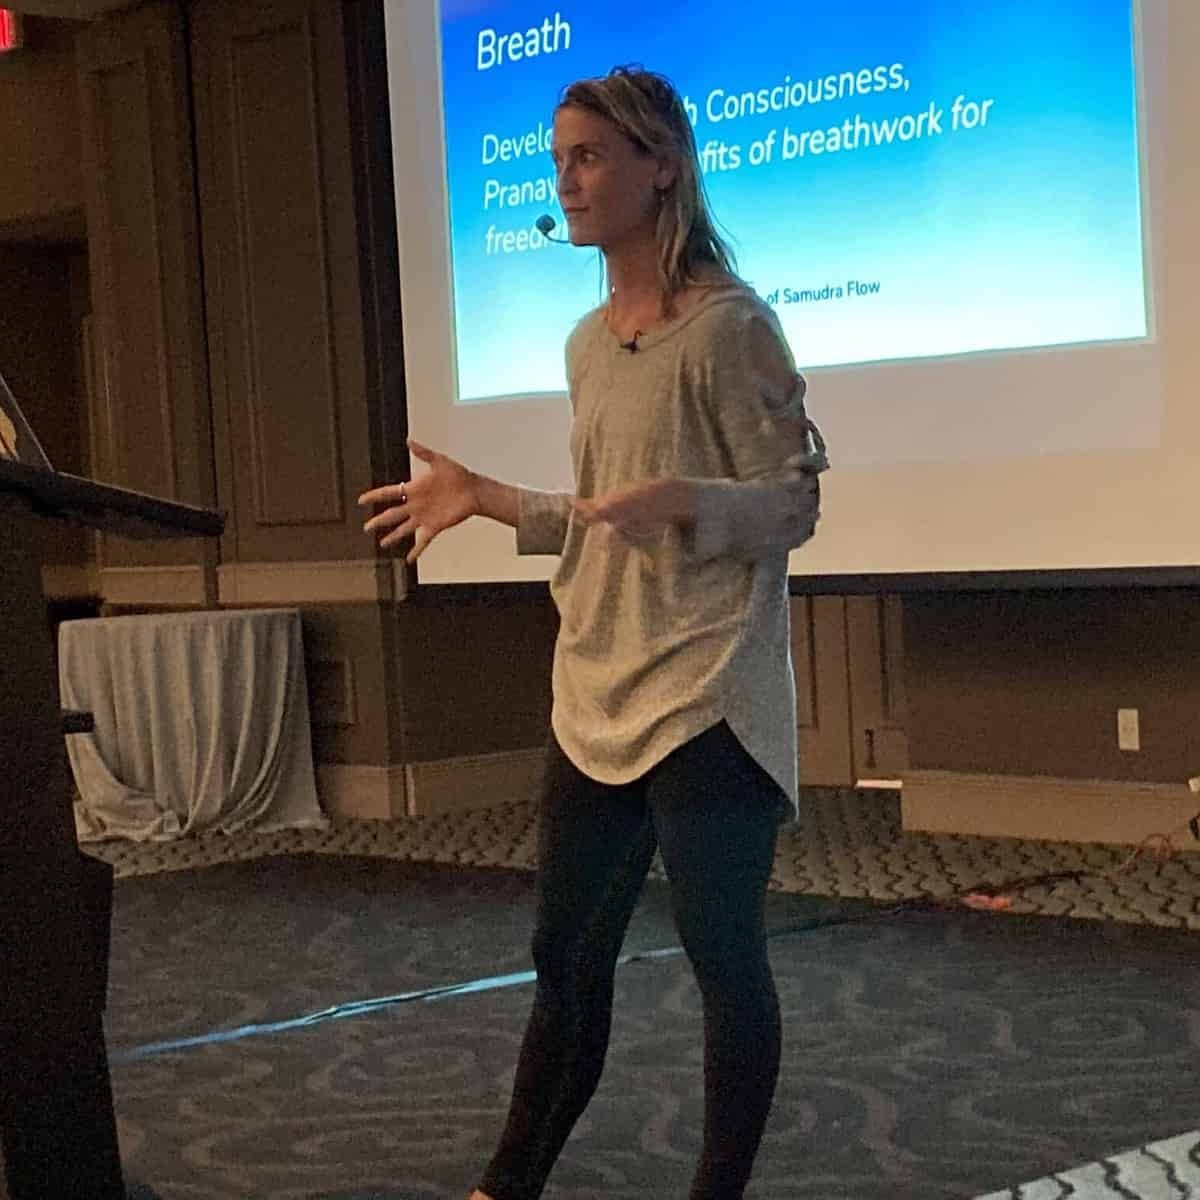 Allie Reilly at 321FREEDIVE Conference